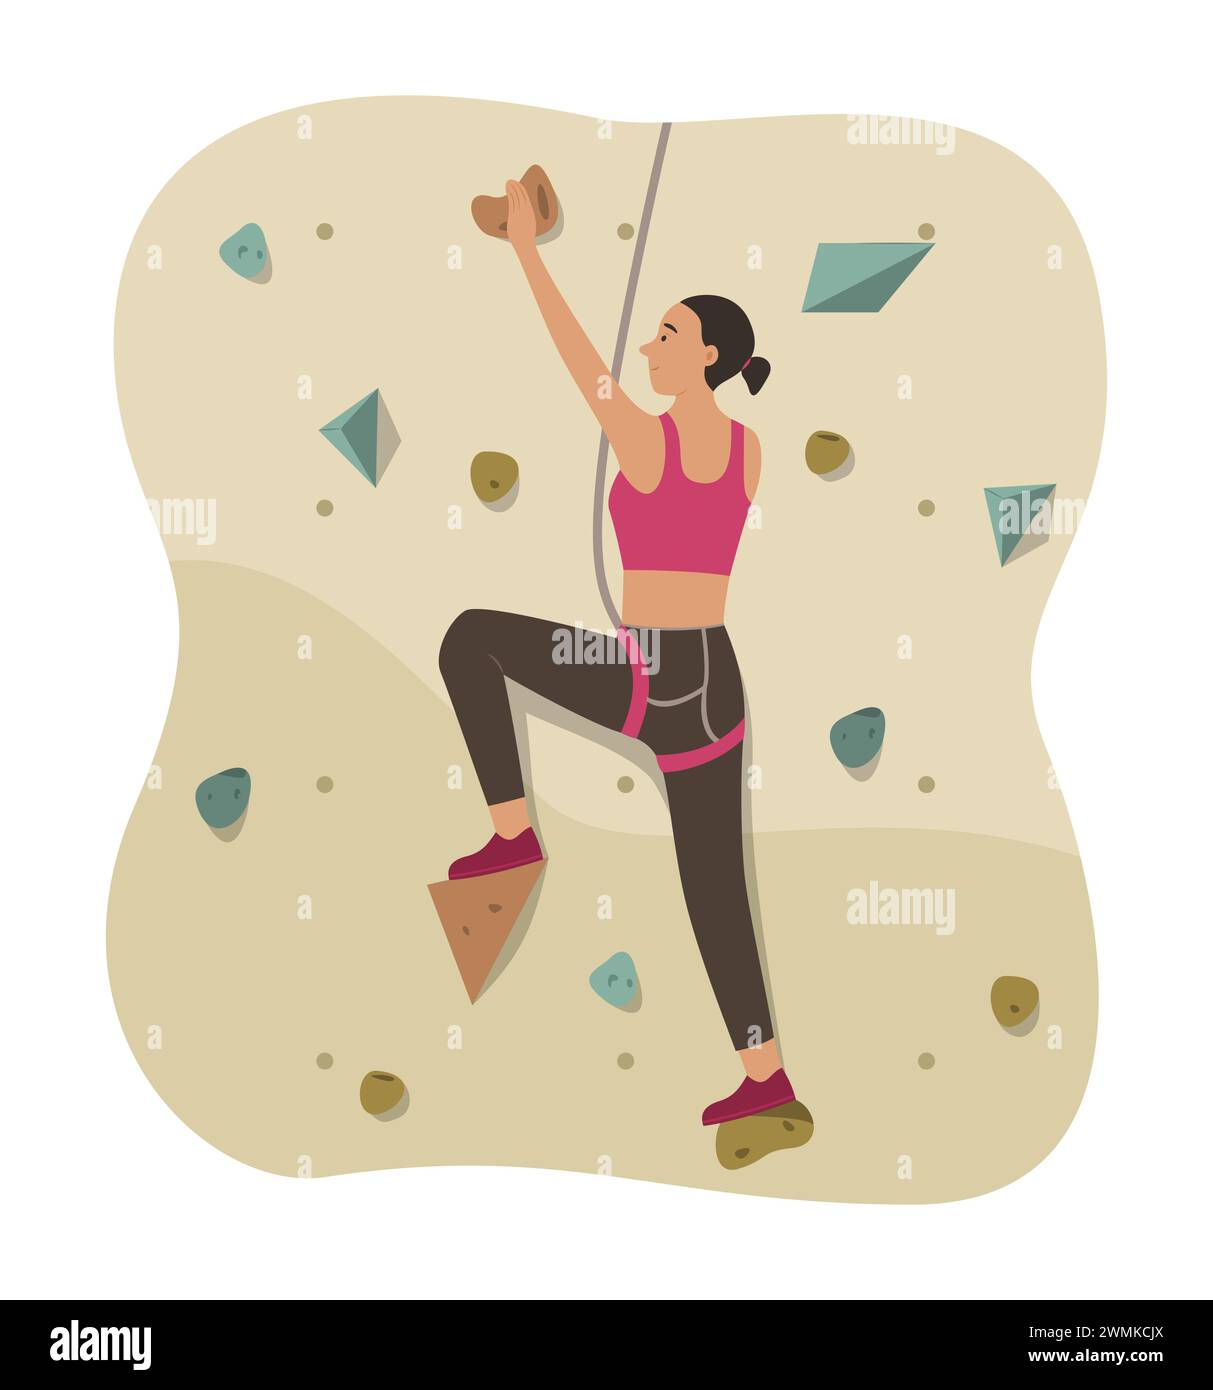 Athlete Woman Exercise with Sport Climbing Concept Illustration Stock Vector